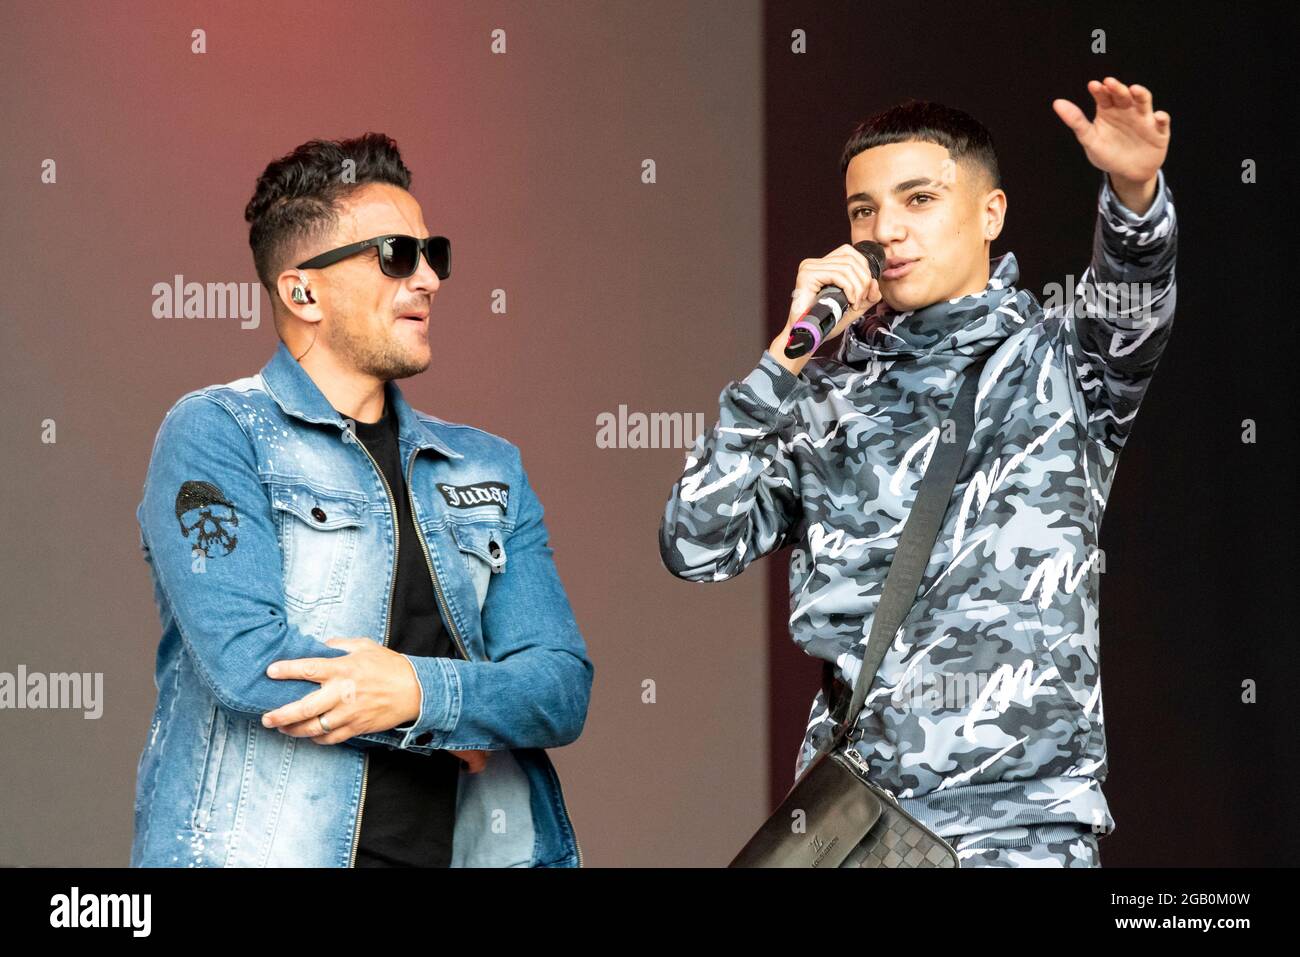 Peter Andre with son Junior Andre performing on stage at the Fantasia music concert in Maldon, Essex, UK soon after lifting of COVID restrictions Stock Photo